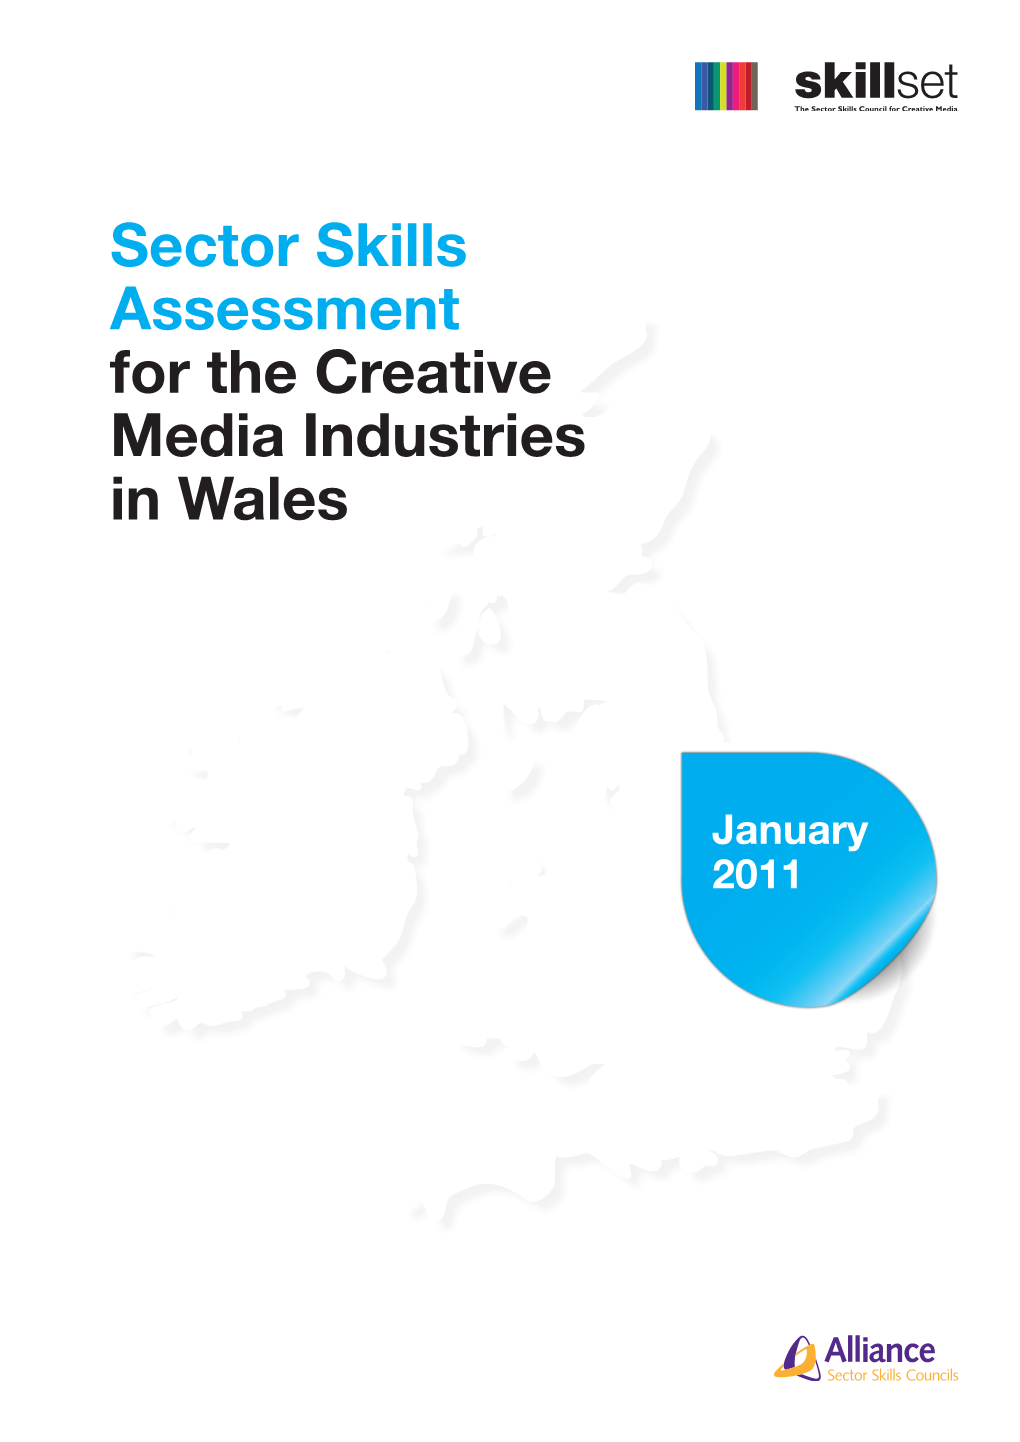 Sector Skills Assessment for the Creative Media Industries in Wales